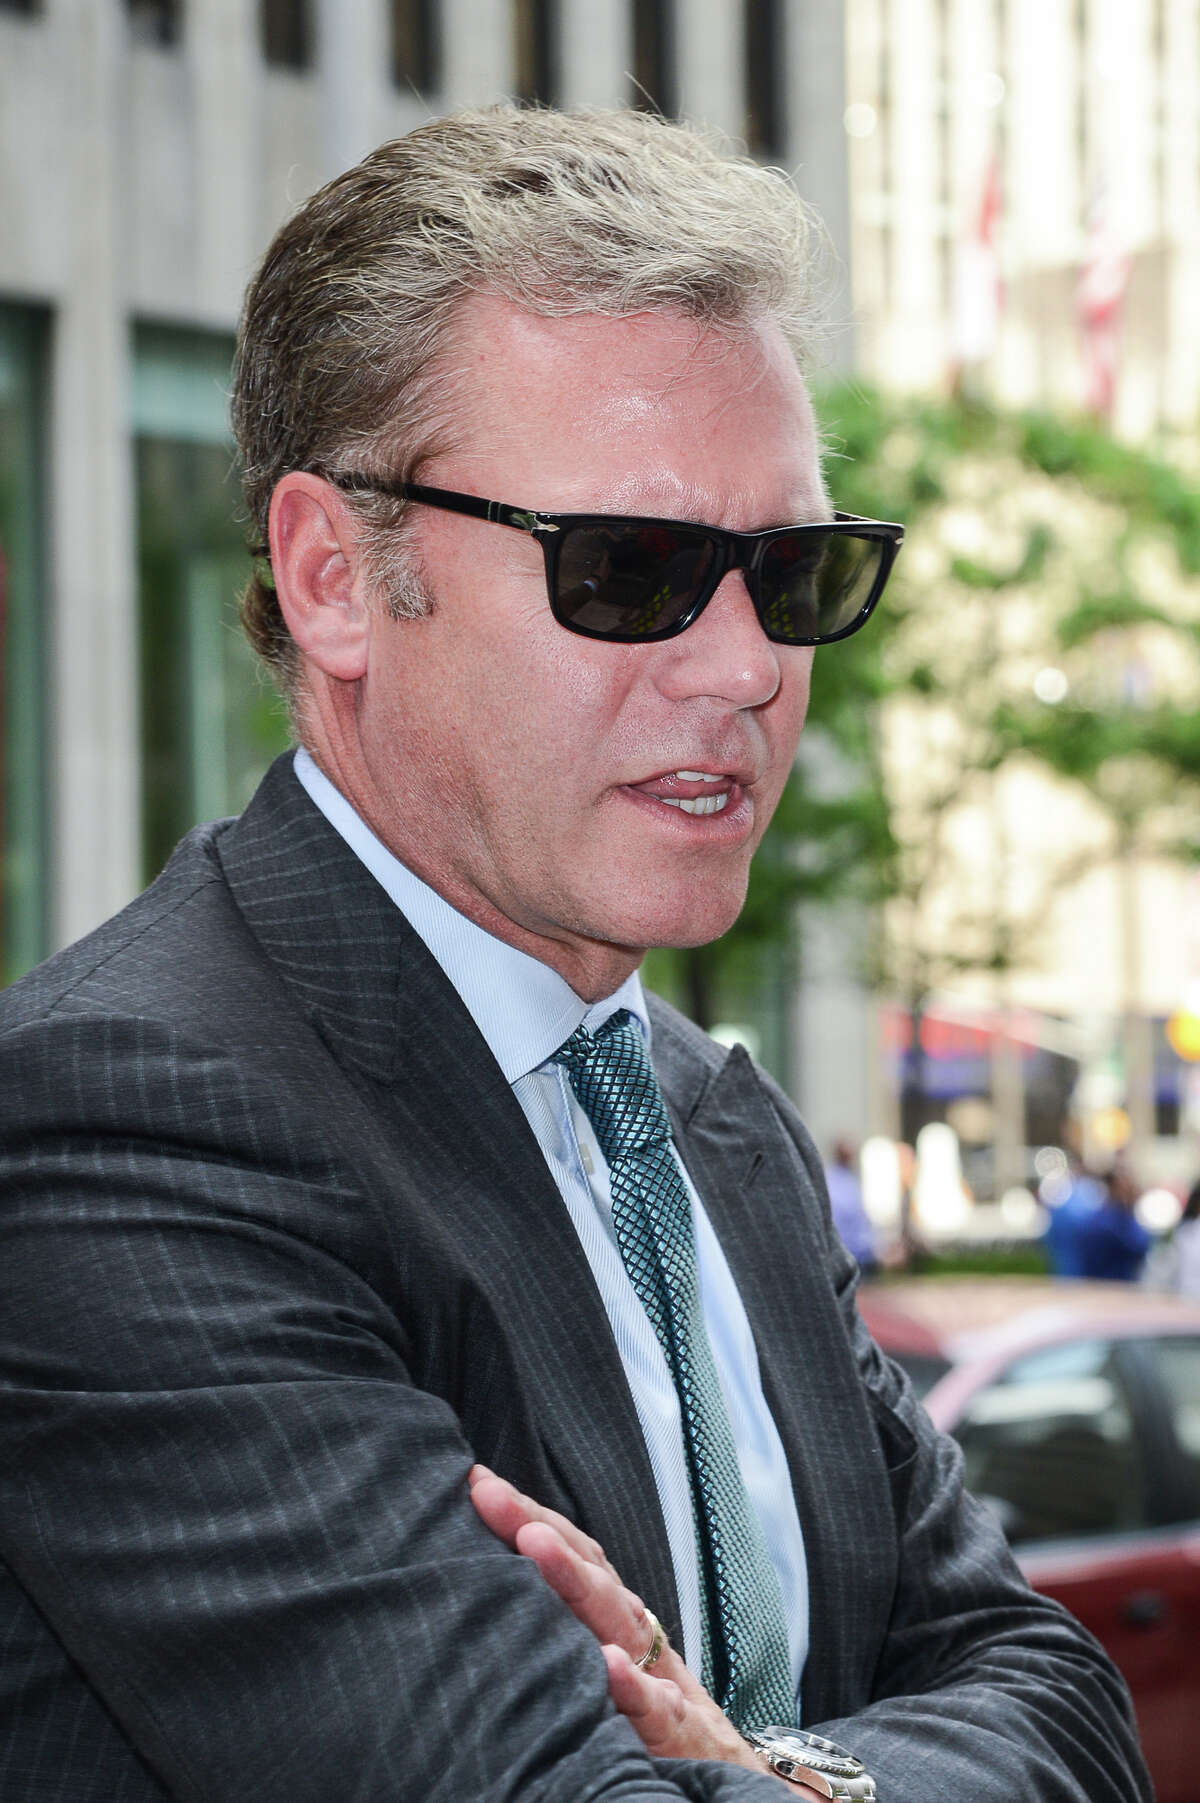 TV personality Chris Hansen leaves the Sirius XM Studios on May 30, 2013 in New York City.